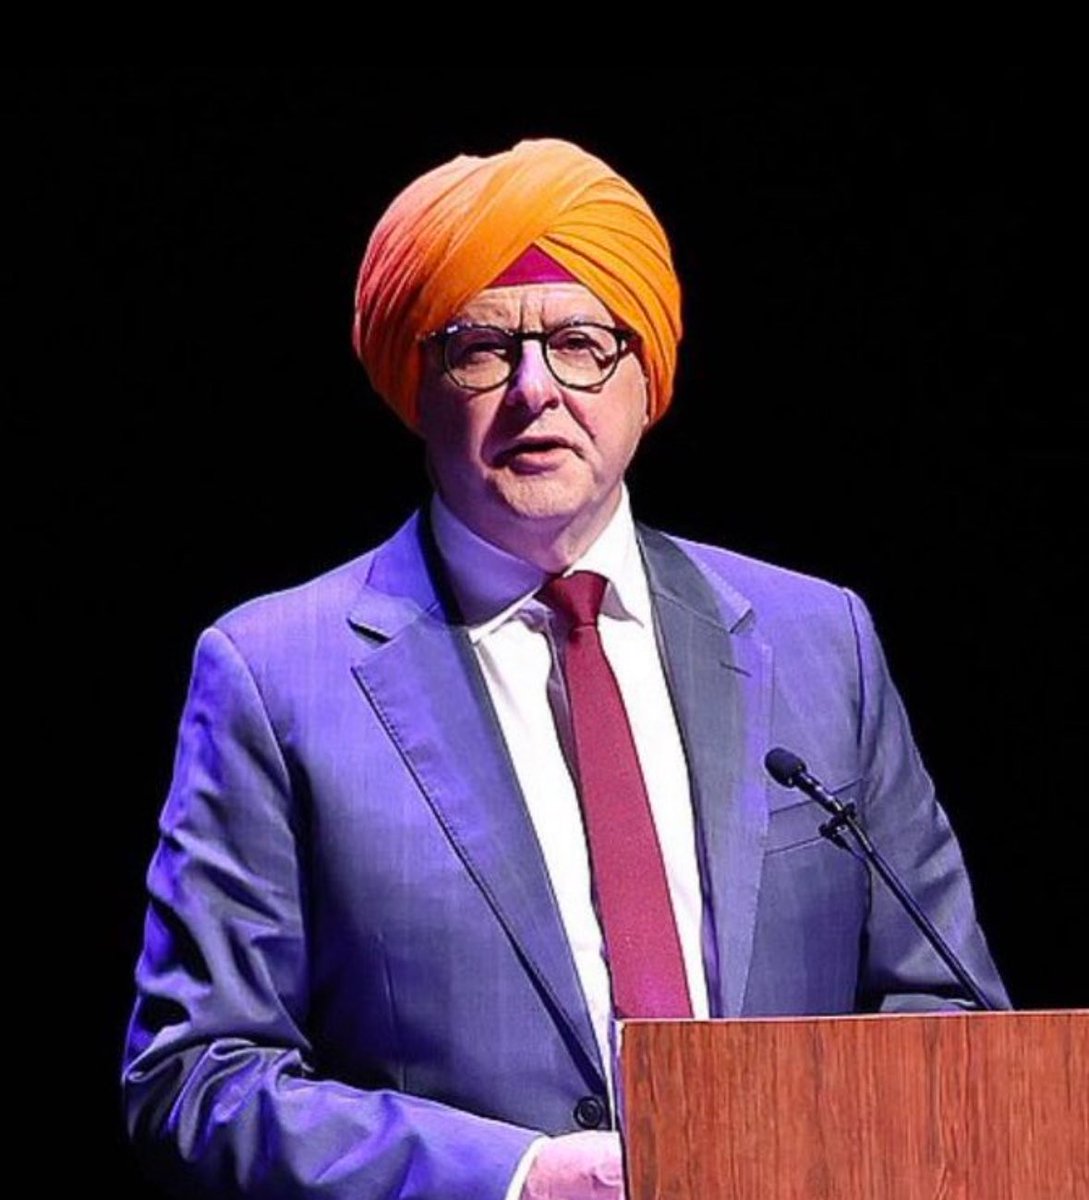 The Australian Prime Minister Anthony Albanese will happily wear a Turban but refuses to wear an Australian flag pin on his suit.